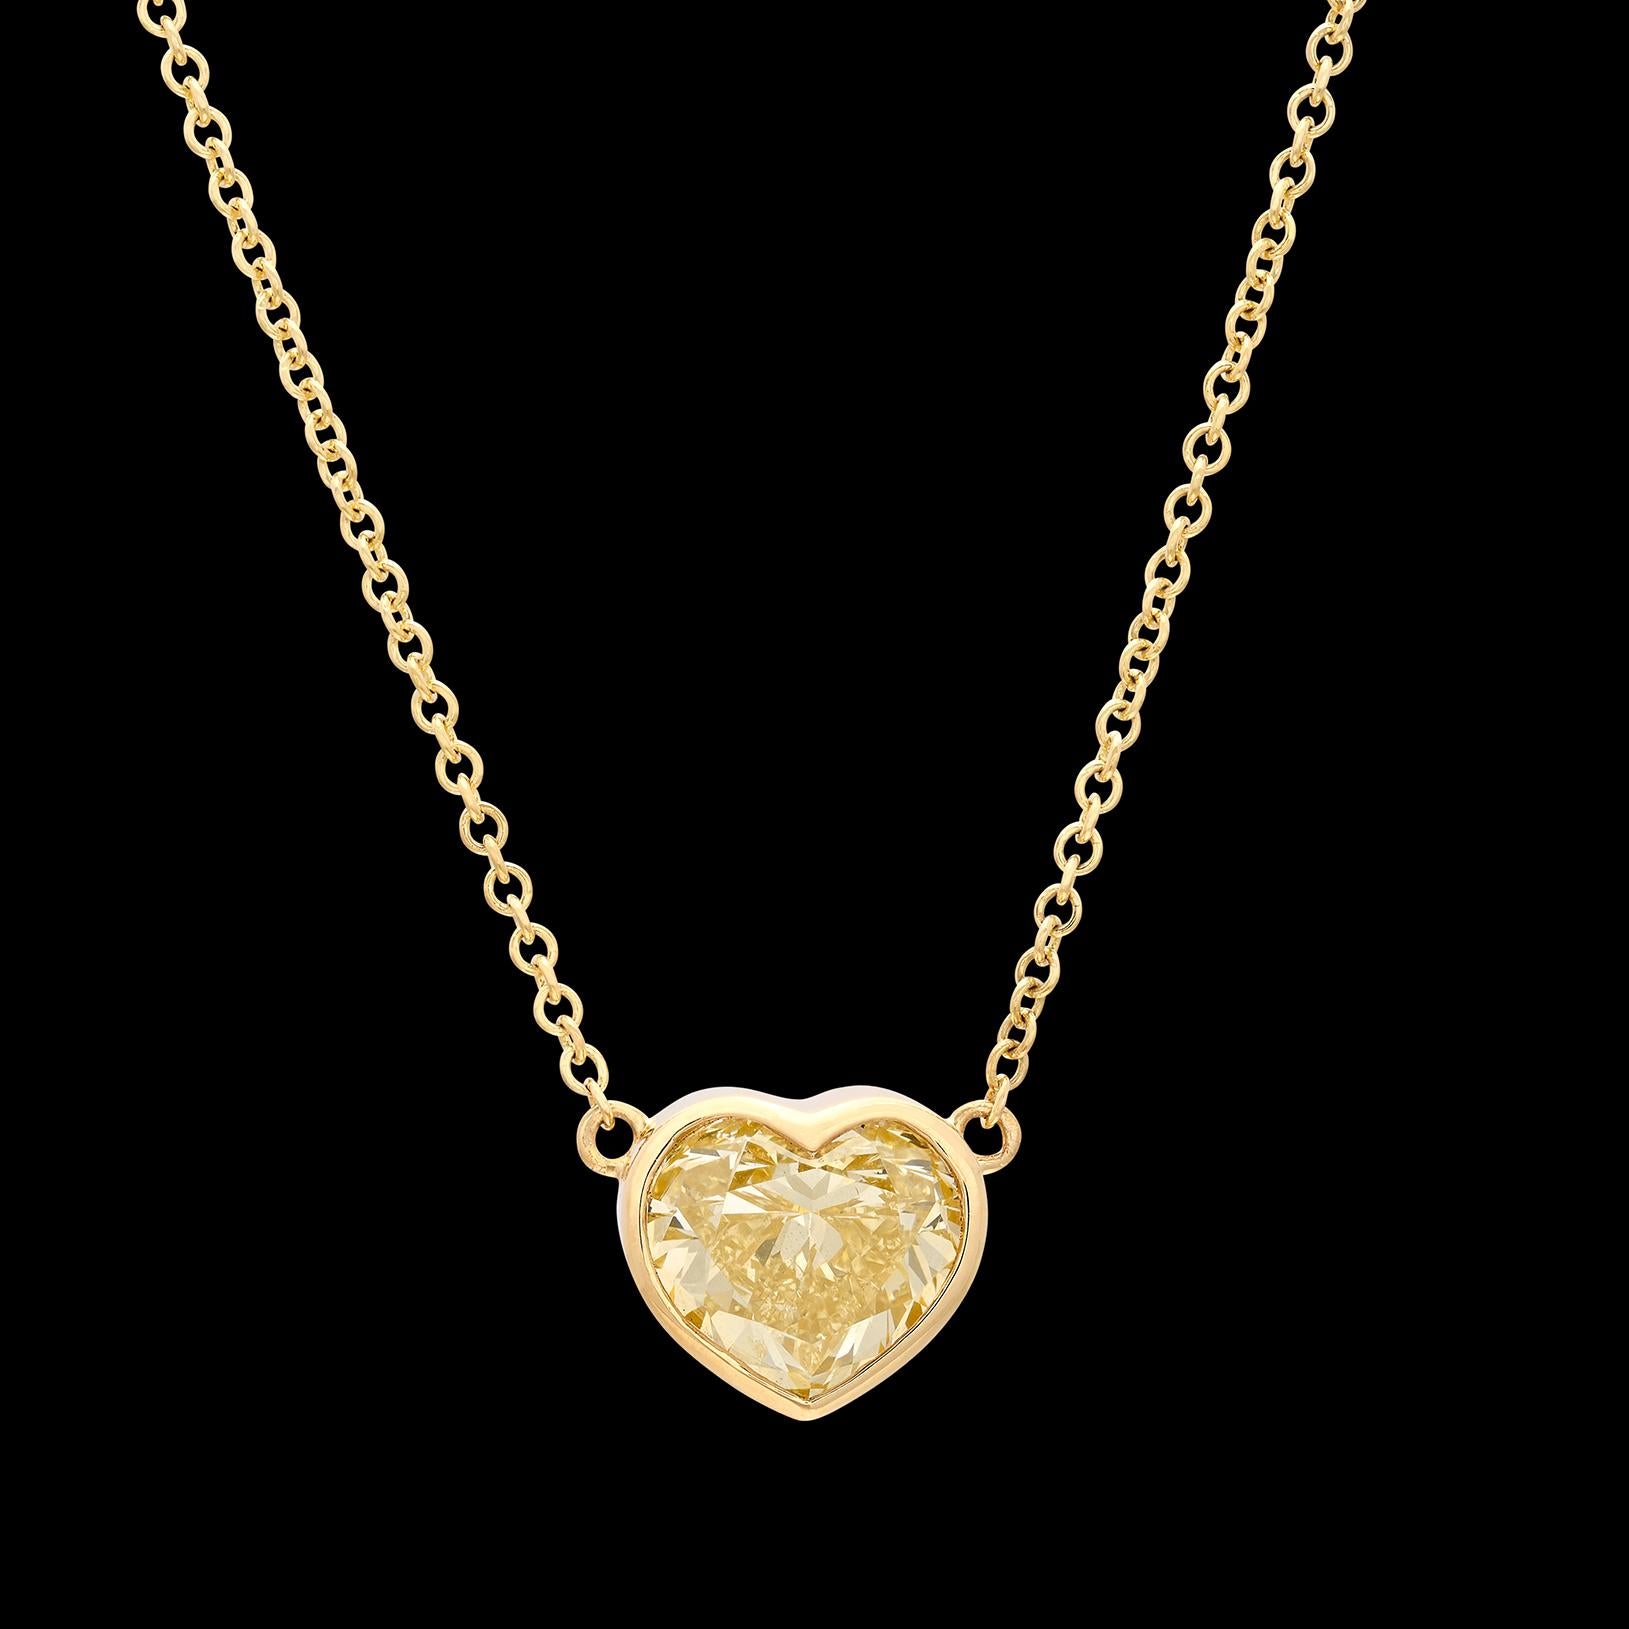 A symbol of true love! This 18k gold solitaire pendant-necklace features a bezel-set heart-shaped weighing 2.0 carats, yellow color and SI clarity, completed with a delicate chain. The weighs 4.4 grams, and is designed to be worn either at 16 or 18